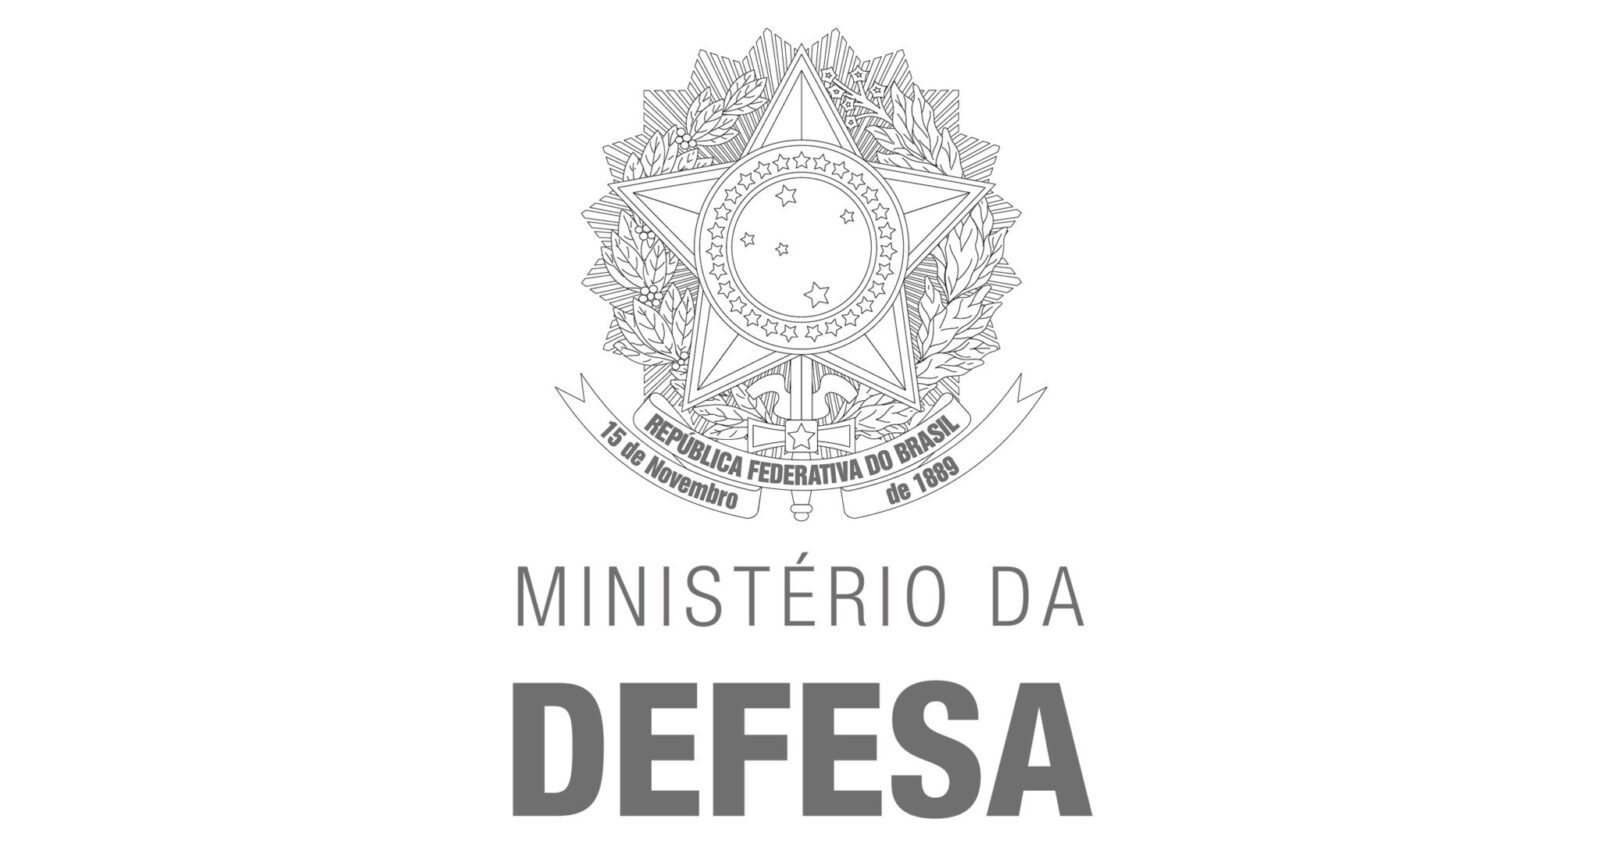 Brazilian DoD clarification note: compensation of military personnel and pensioners